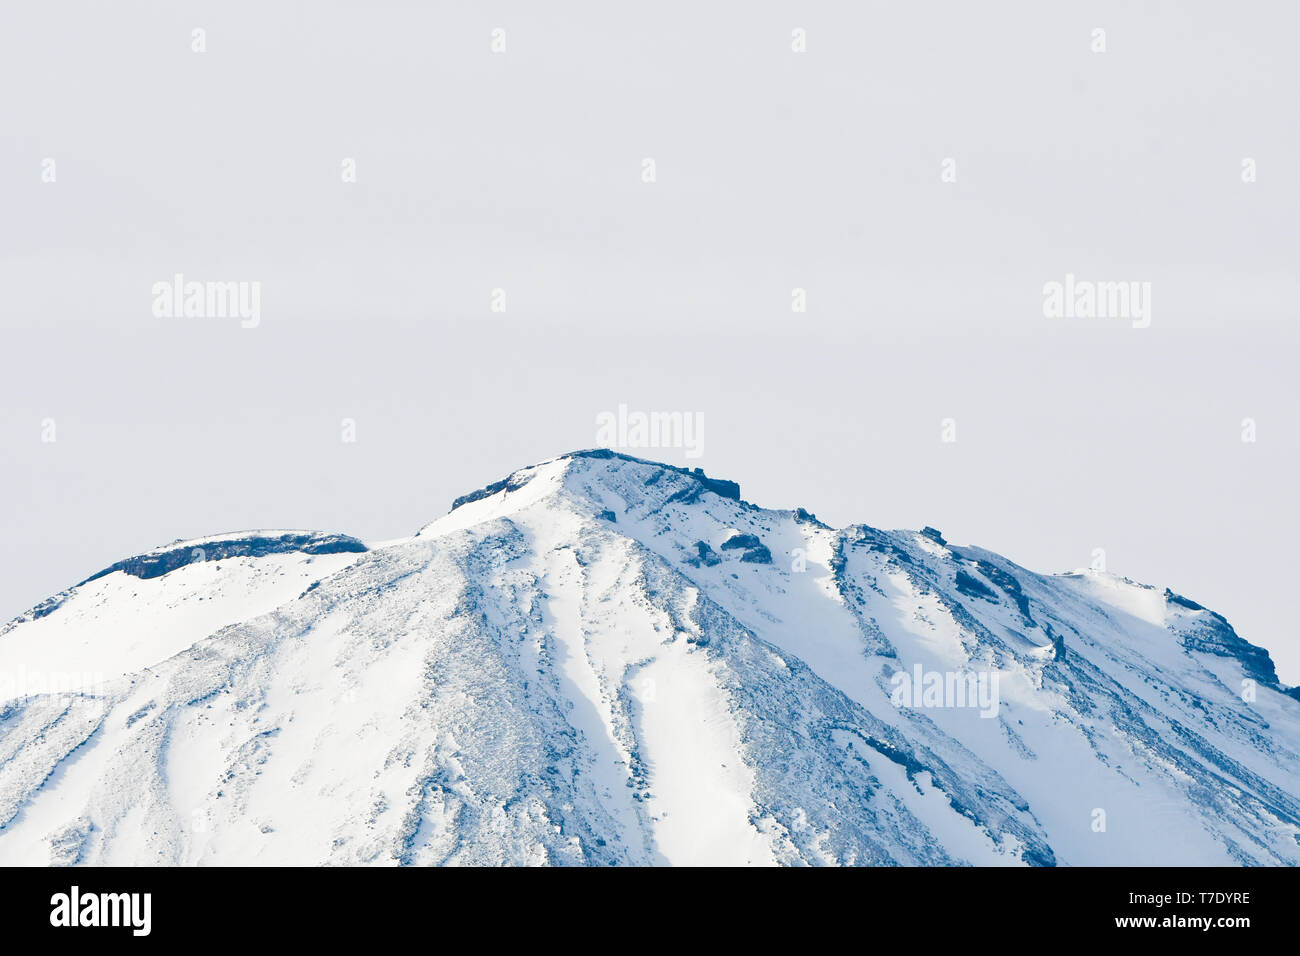 Tokyo, Japan. 5th May, 2019. A view of Mount Fuji highest point from Kawaguchiko in Shizuoka Prefecture Japan on Sunday, May 5, 2019. Photo by: Ramiro Agustin Vargas Tabares Credit: Ramiro Agustin Vargas Tabares/ZUMA Wire/Alamy Live News Stock Photo